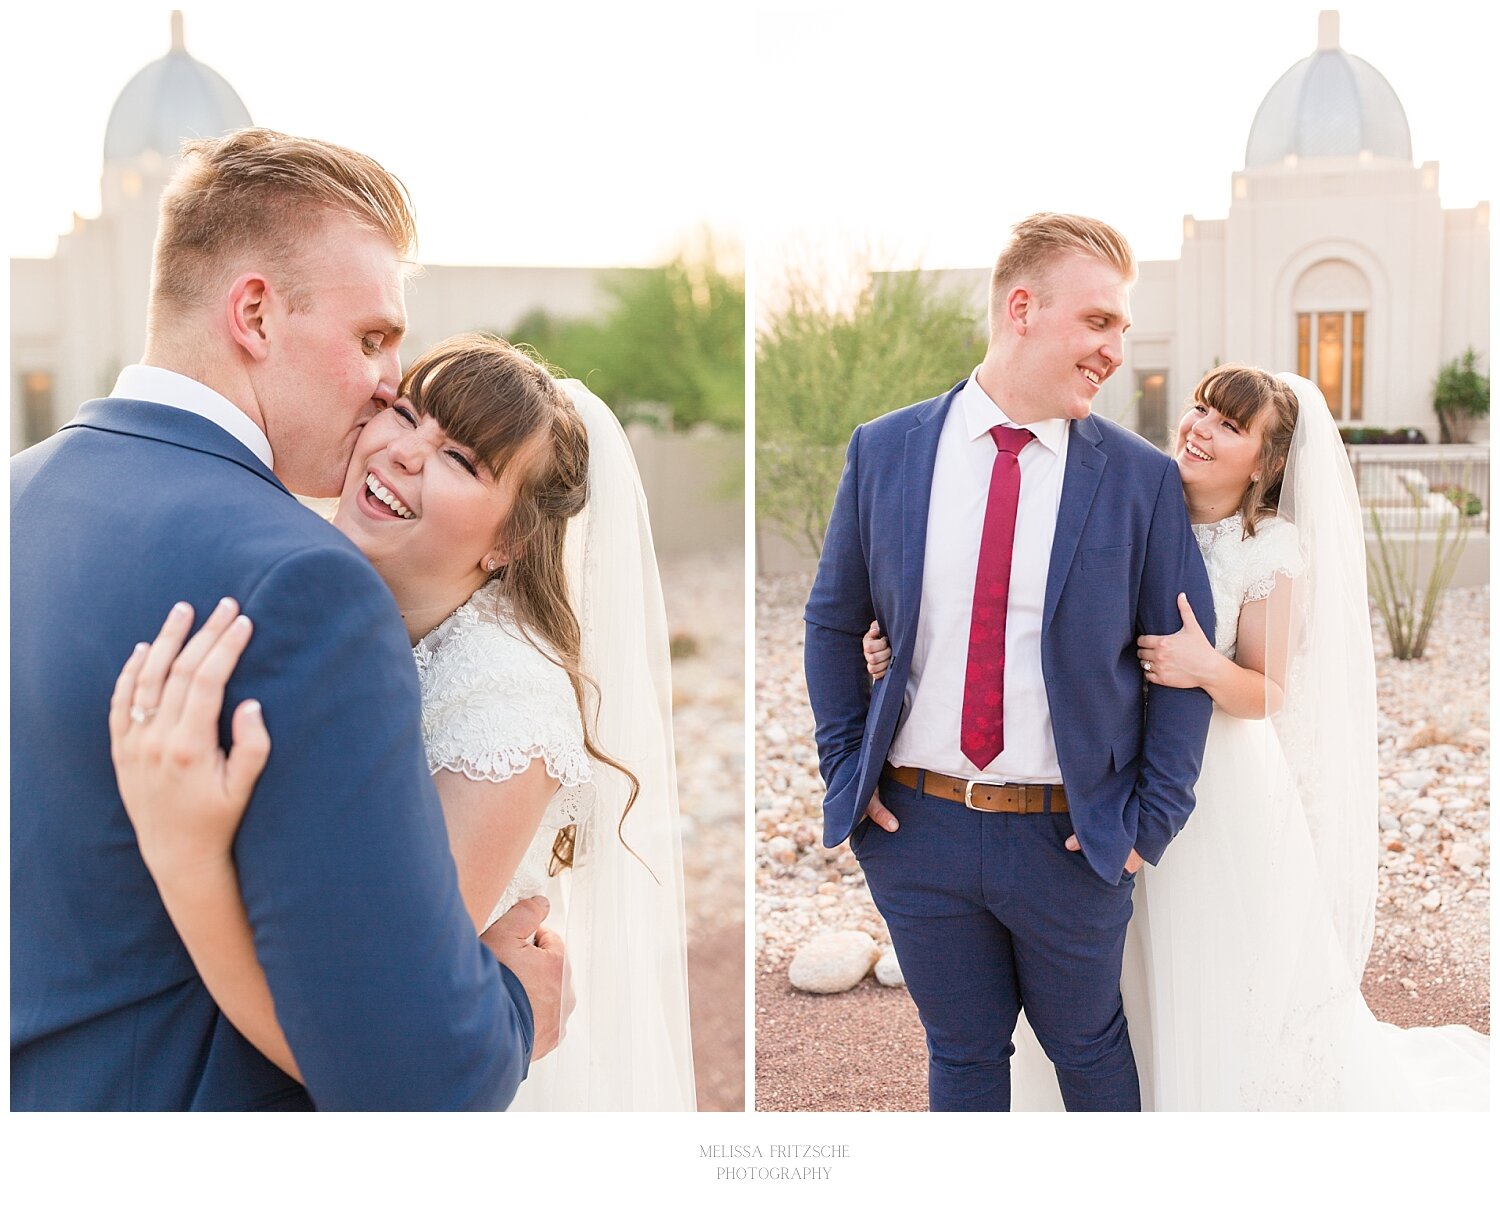 Joyful wedding photography by Melissa Fritzsche Photography in Tucson, Arizona. Bride and Groom in front to the fountains at the Tucson Temple.